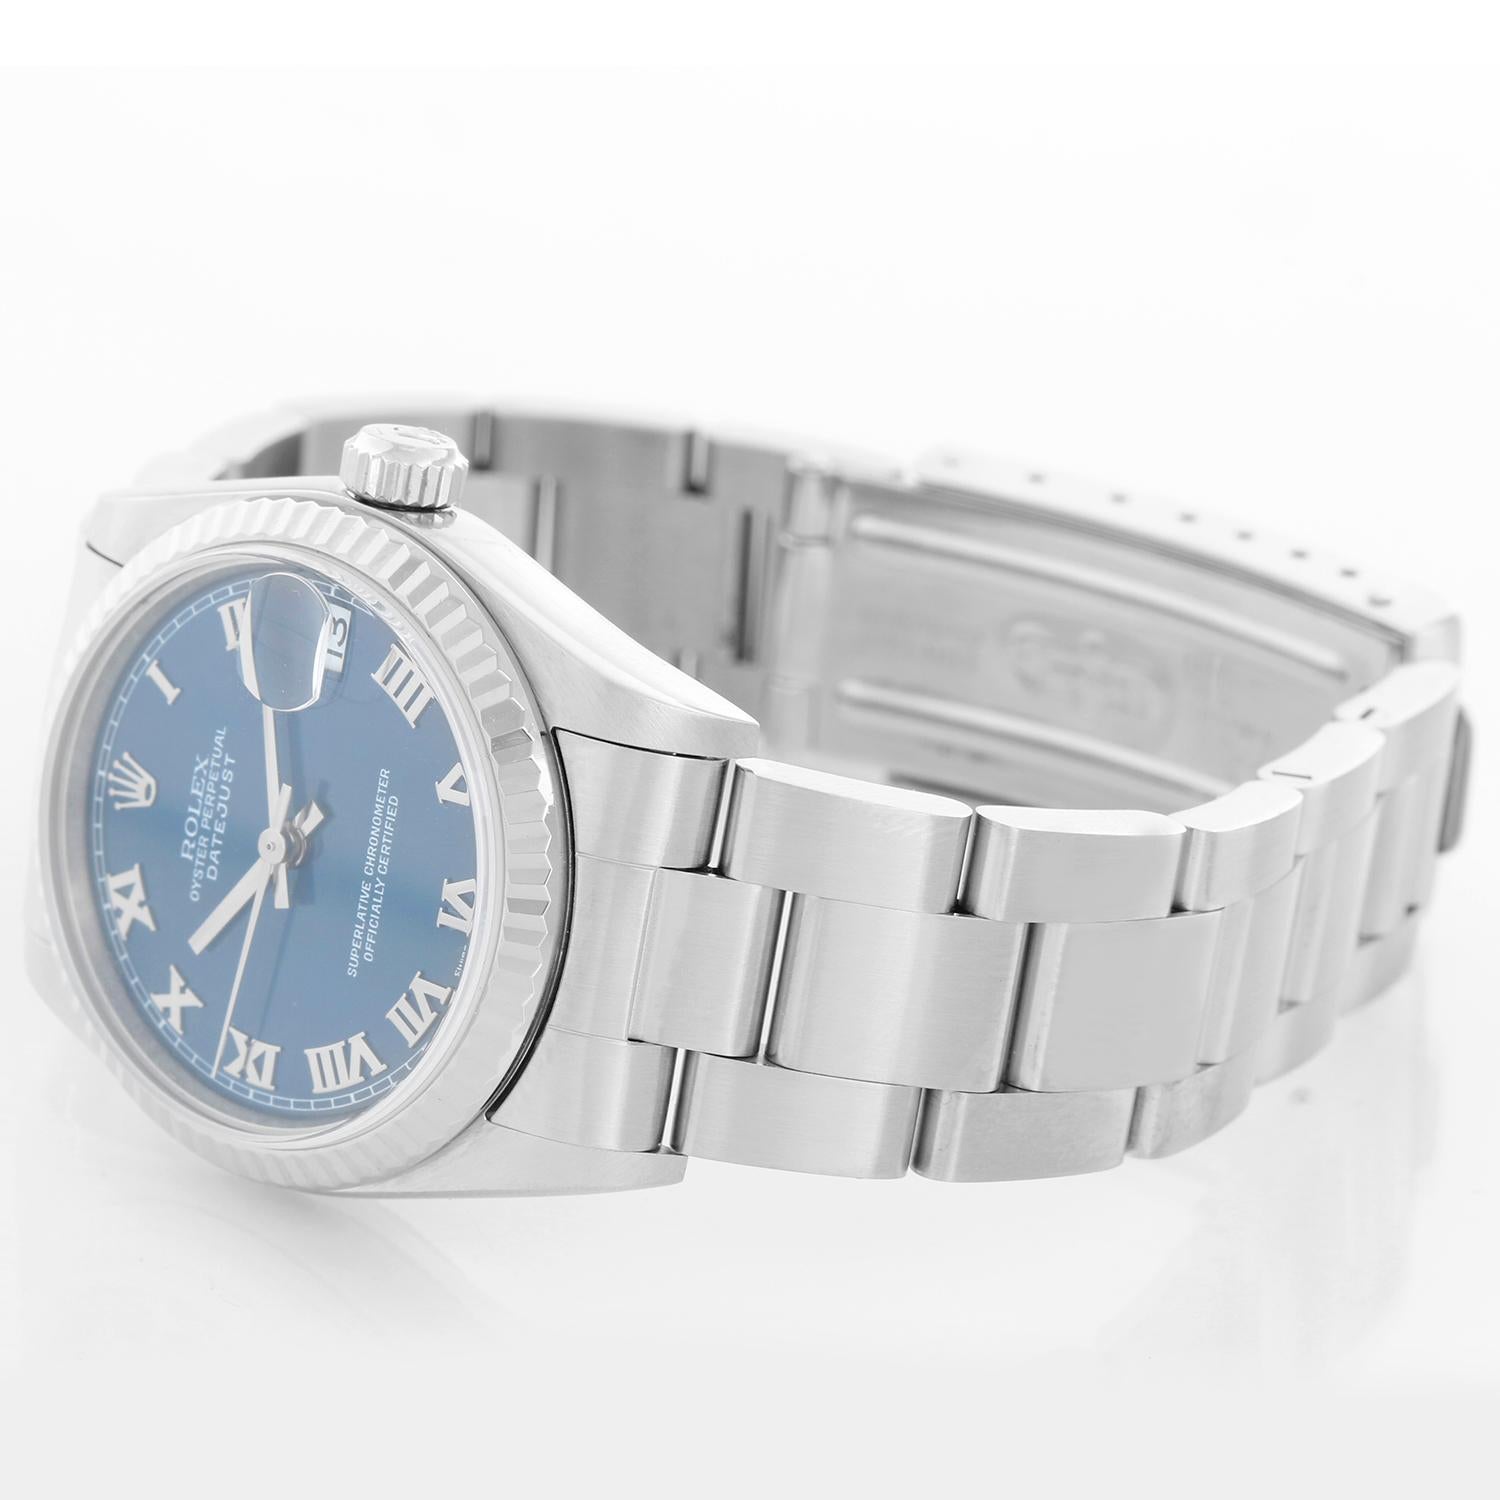 Rolex Midsize Stainless Steel Datejust Blue Dial Watch 78274 - Automatic winding; 31 jewel; sapphire crystal. Stainless steel case with 18k white gold fluted bezel (31mm diameter). Blue dial with steel Roman numerals. Stainless steel oyster